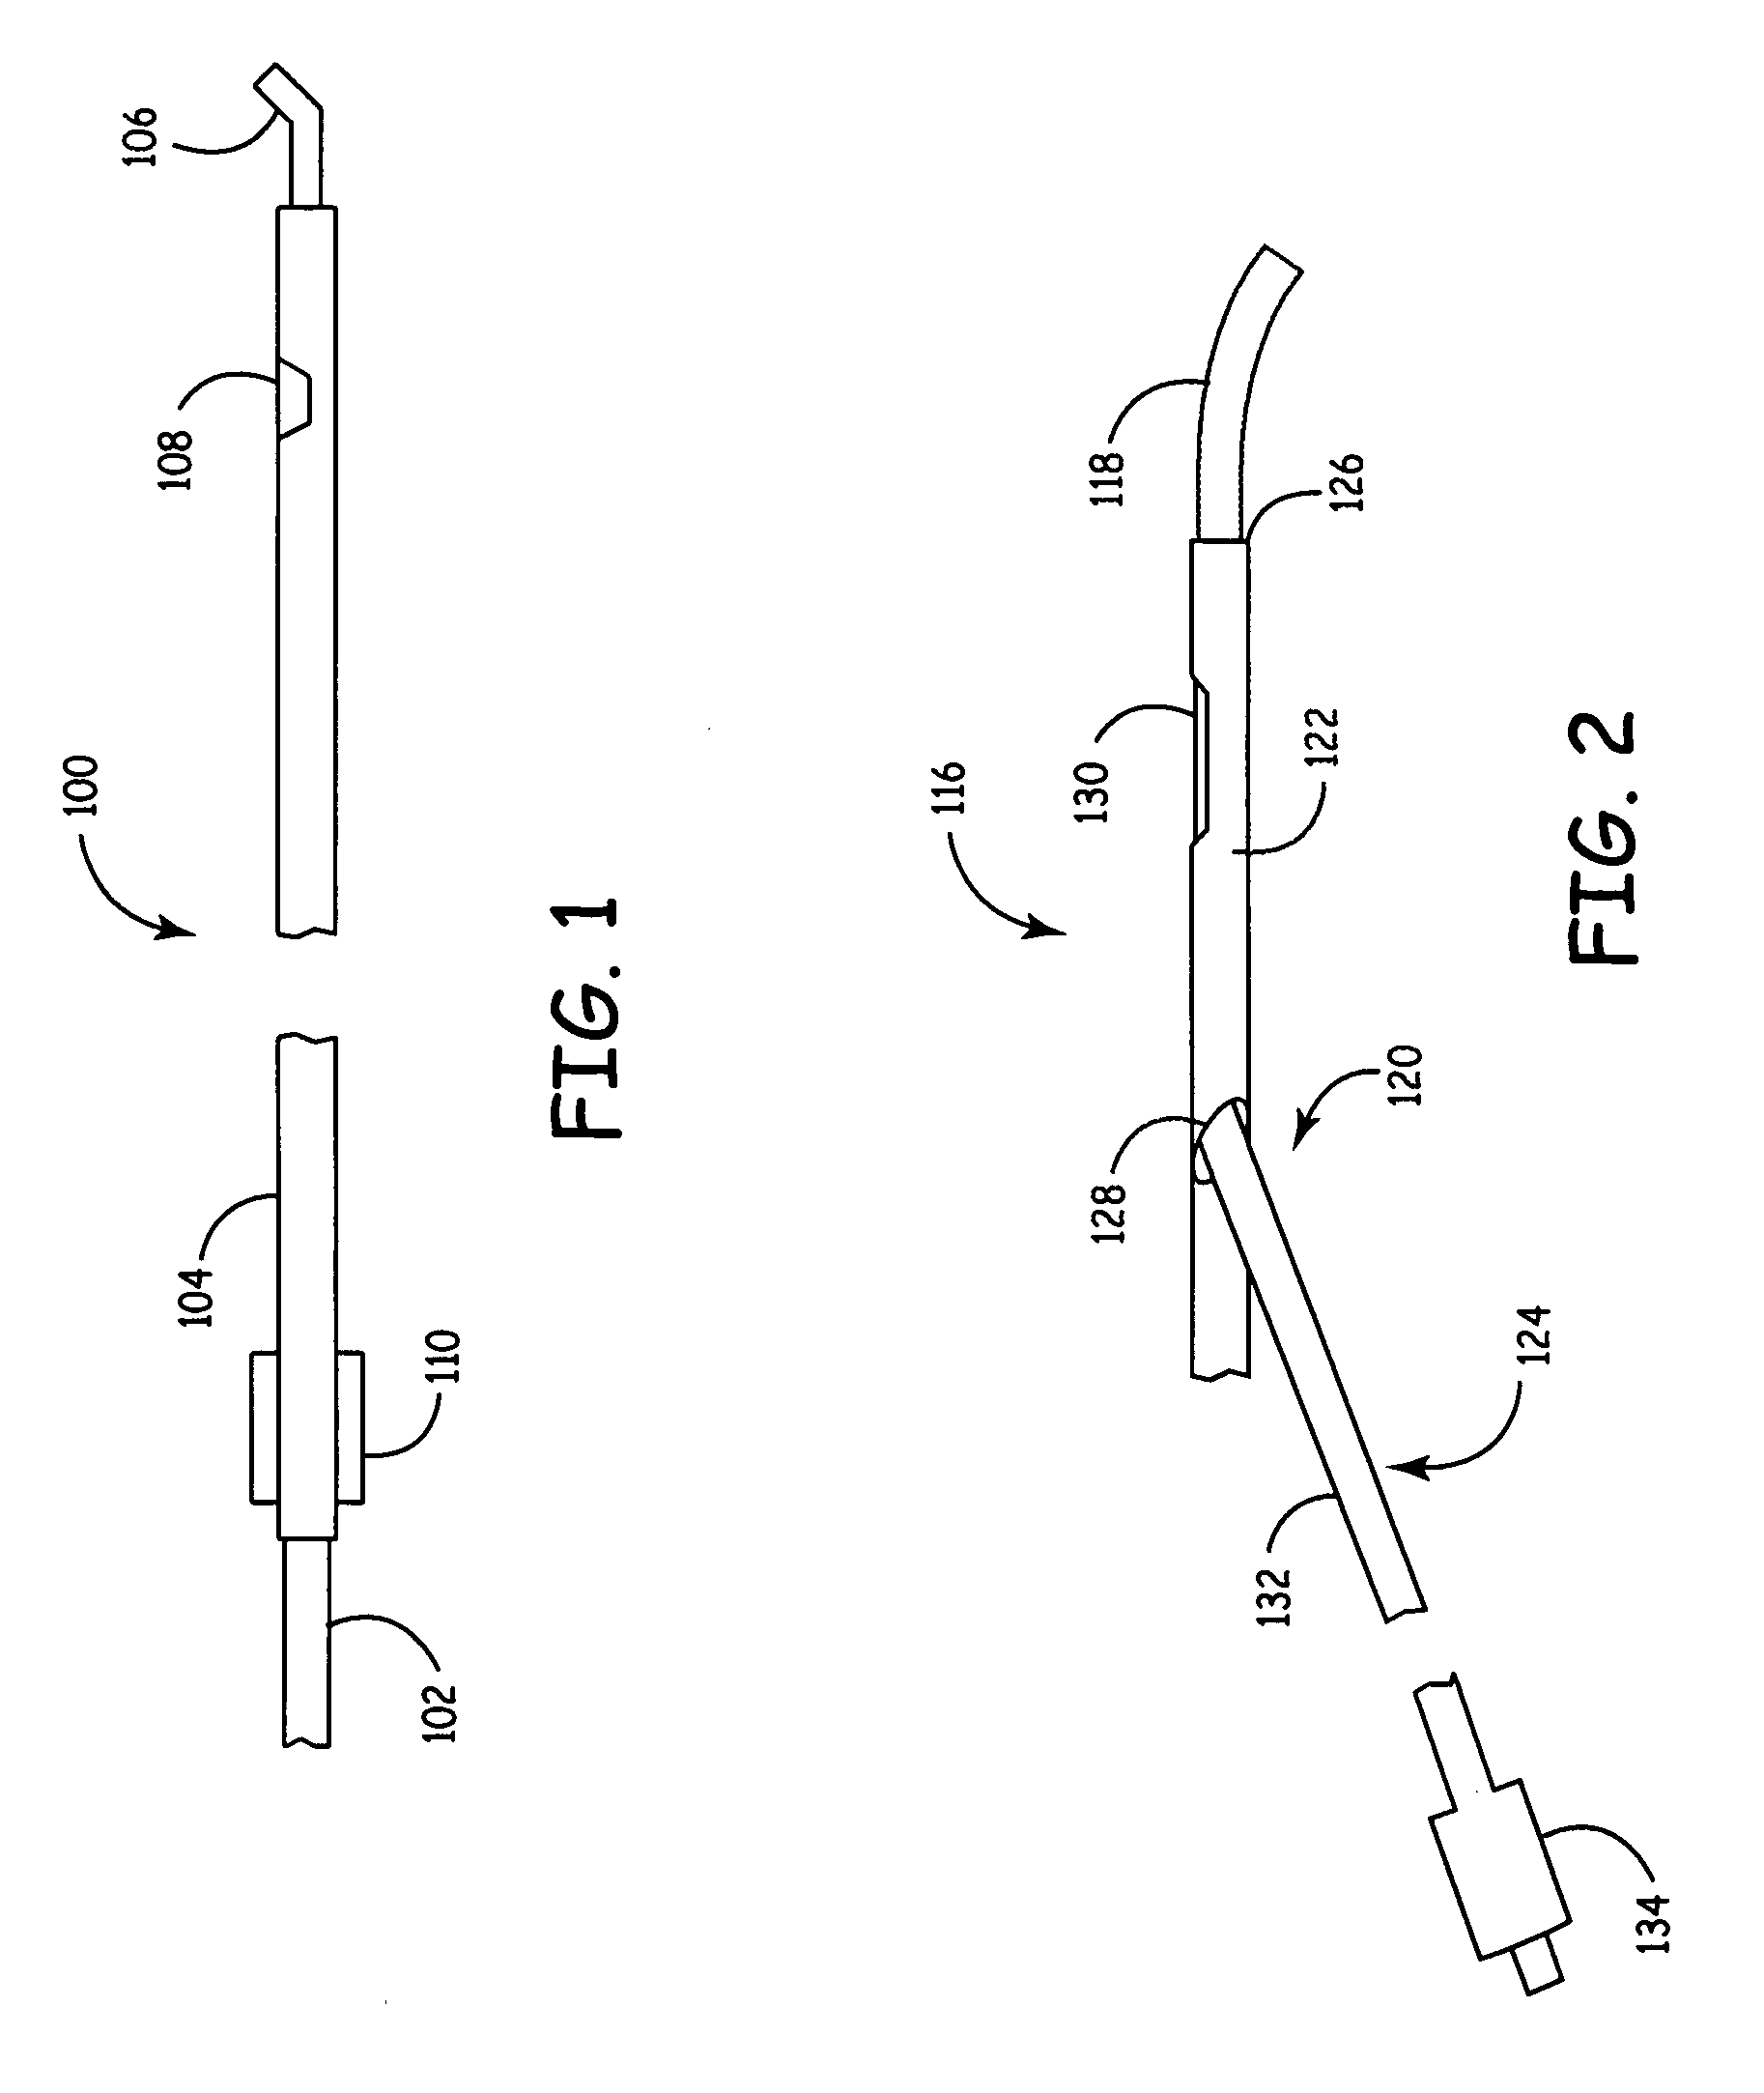 Deflection control catheters, support catheters and methods of use